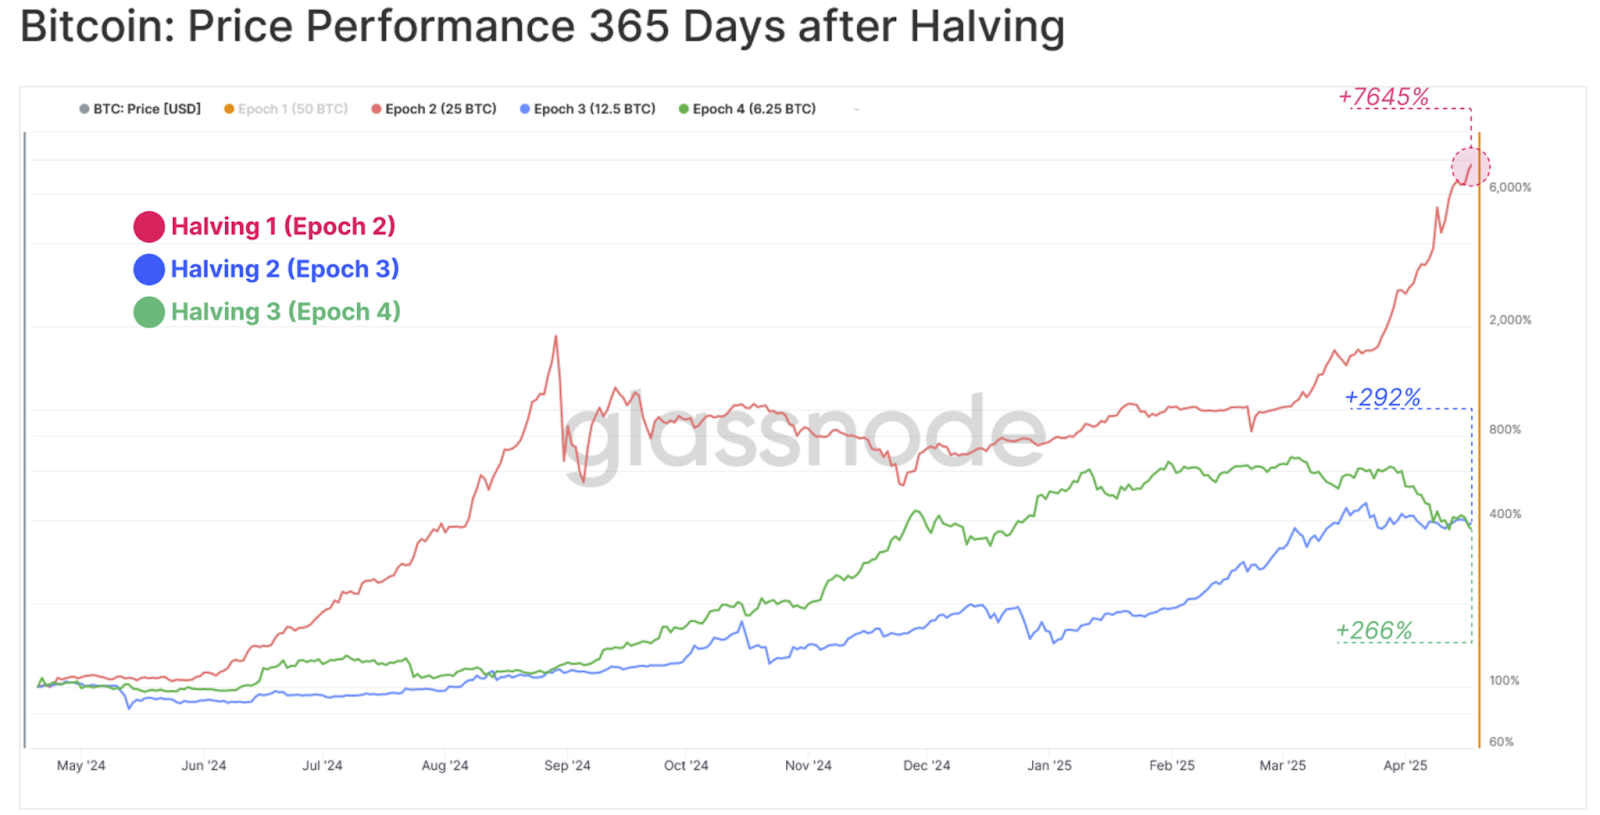 Chart showing glassnode analysis that much of the gains following Bitcoin halvings have historically been in the 365 days following a halving